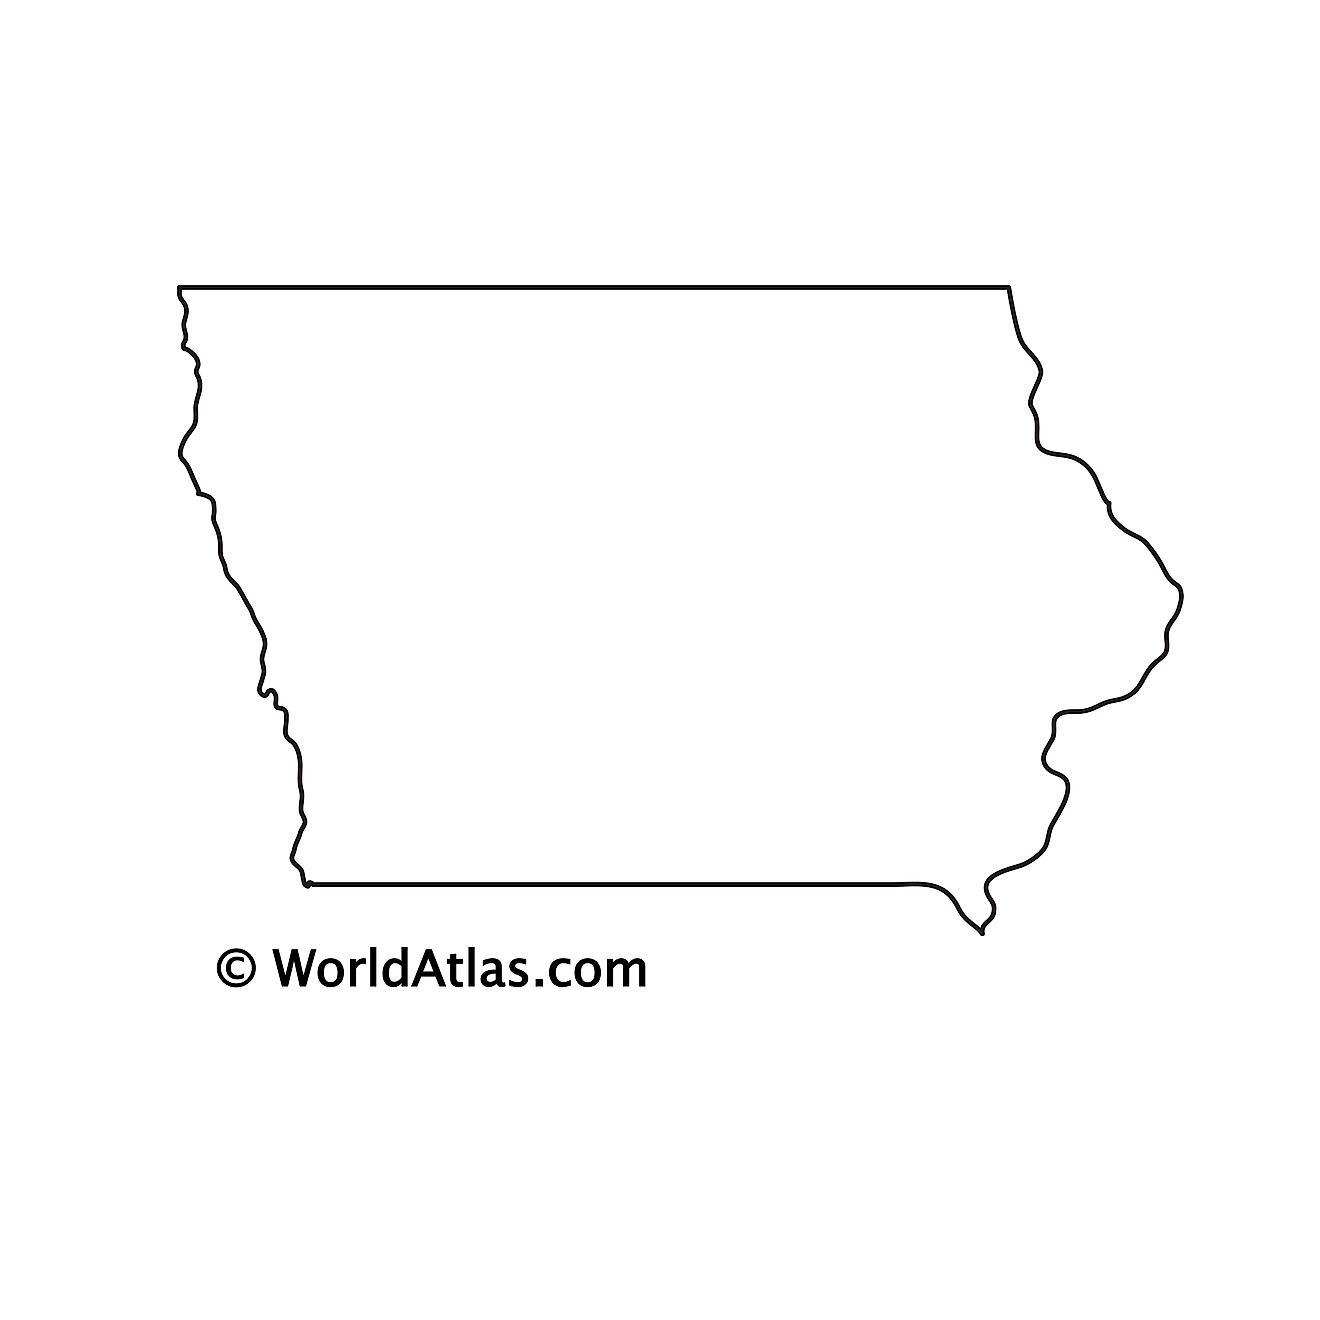 Blank Outline Map of Iowa